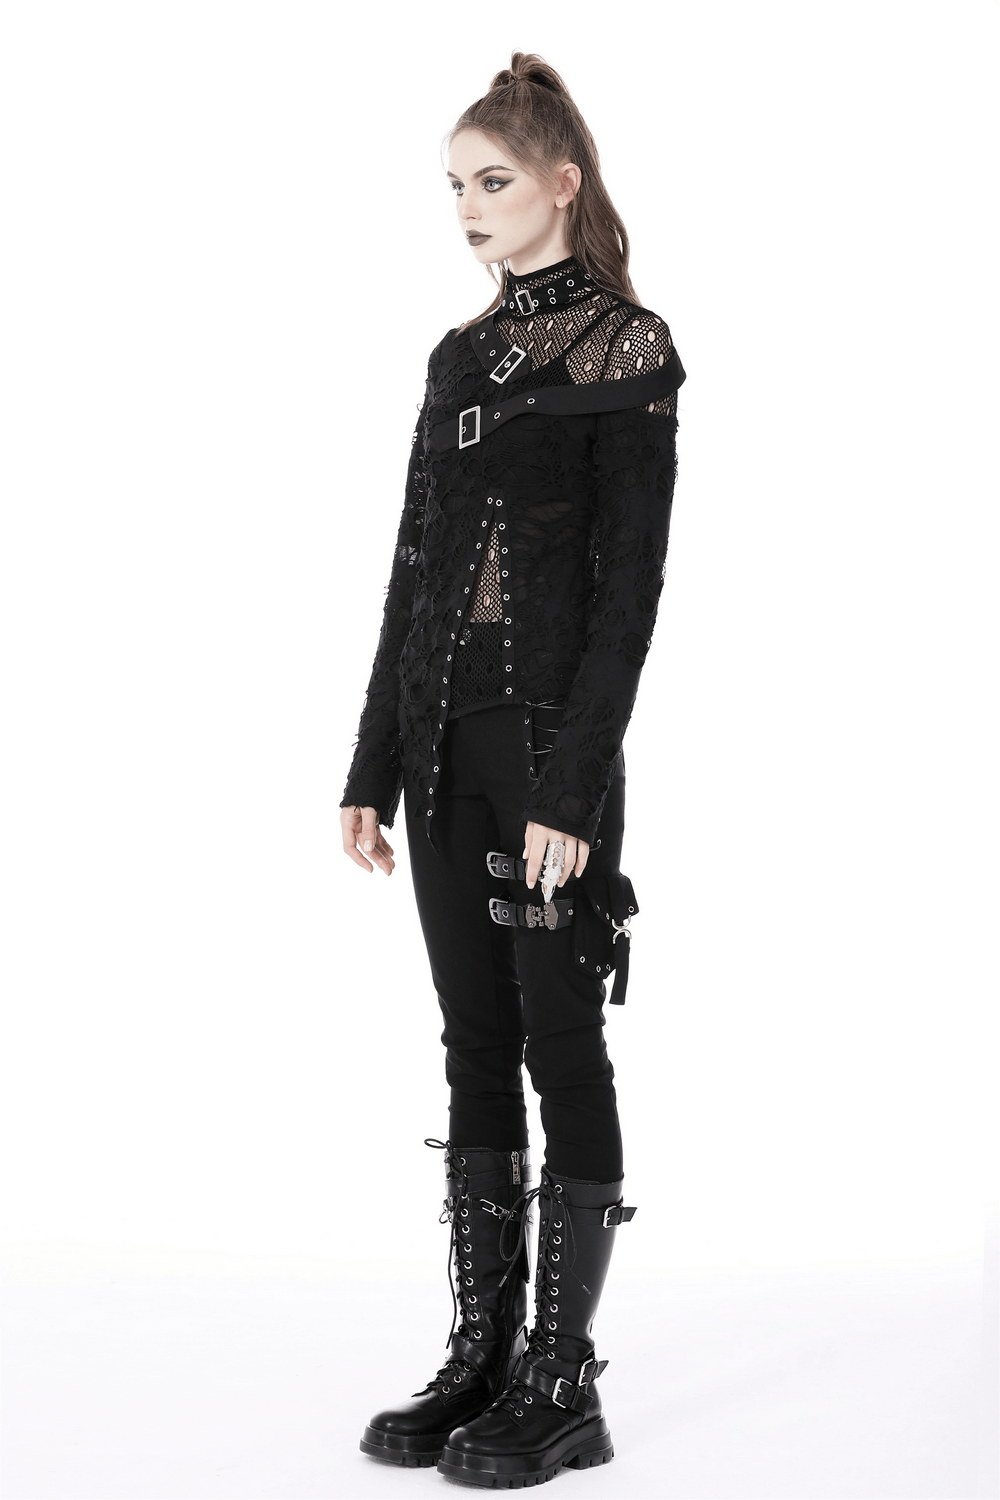 Edgy Grunge Deconstructed Mesh Sweatshirt with Buckle Accents